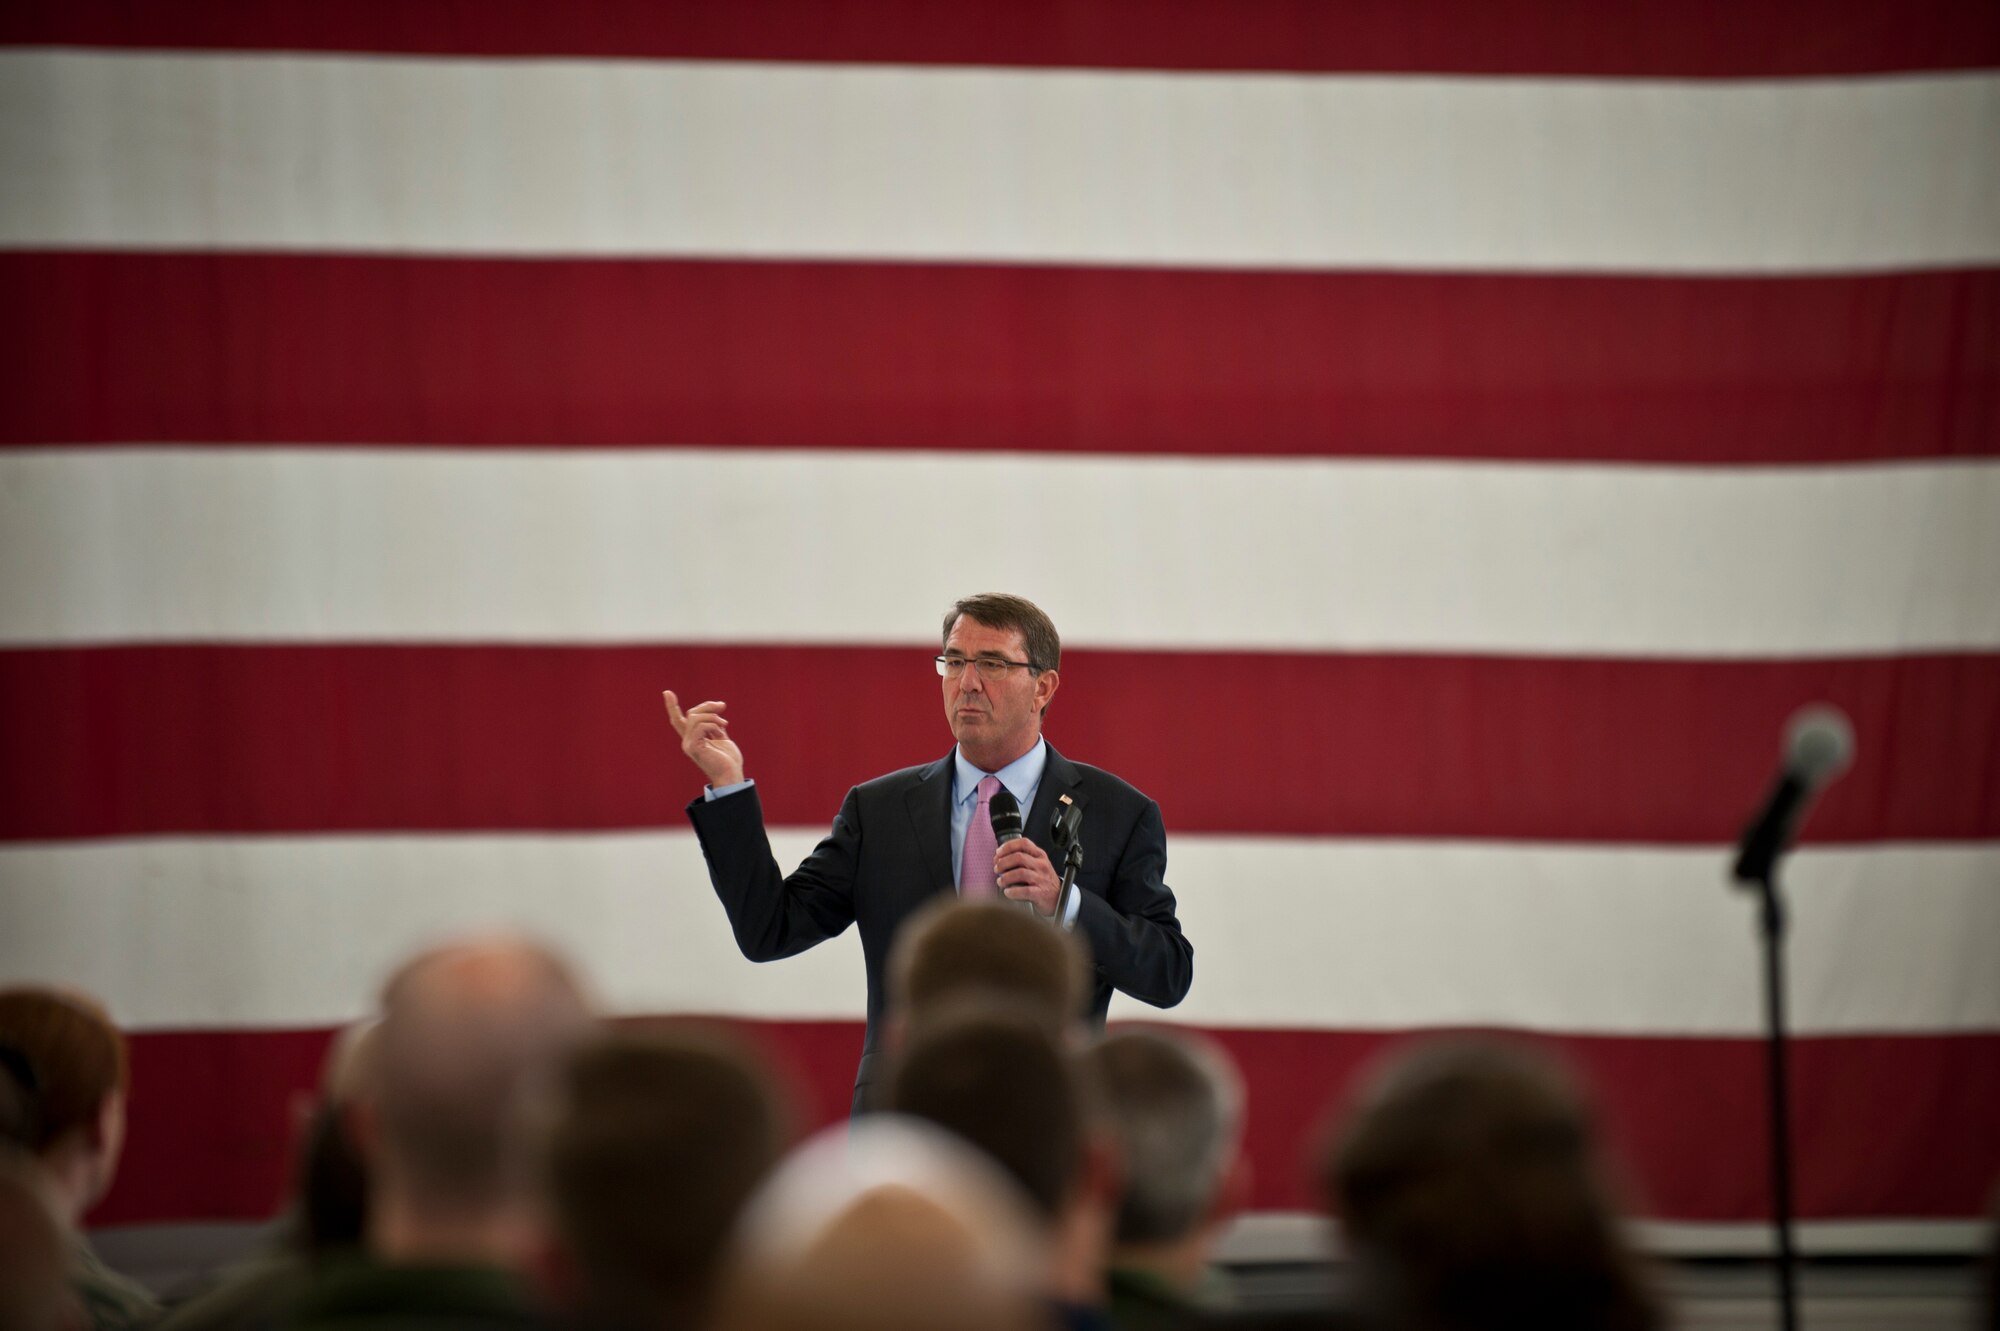 Defense Secretary Ash Carter addresses Airmen and coalition partners during an all call at Nellis Air Force Base, Nev., Aug. 26, 2015. During the secretary’s visit to Nellis AFB he observed Red Flag 15-4 operations and spoke to Airmen and coalition partners. During the all call, Carter took questions from service members and addressed issues relating to budgets, force retention, morale and operational priorities. (U.S. Air Force photo/Senior Airman Joshua Kleinholz)